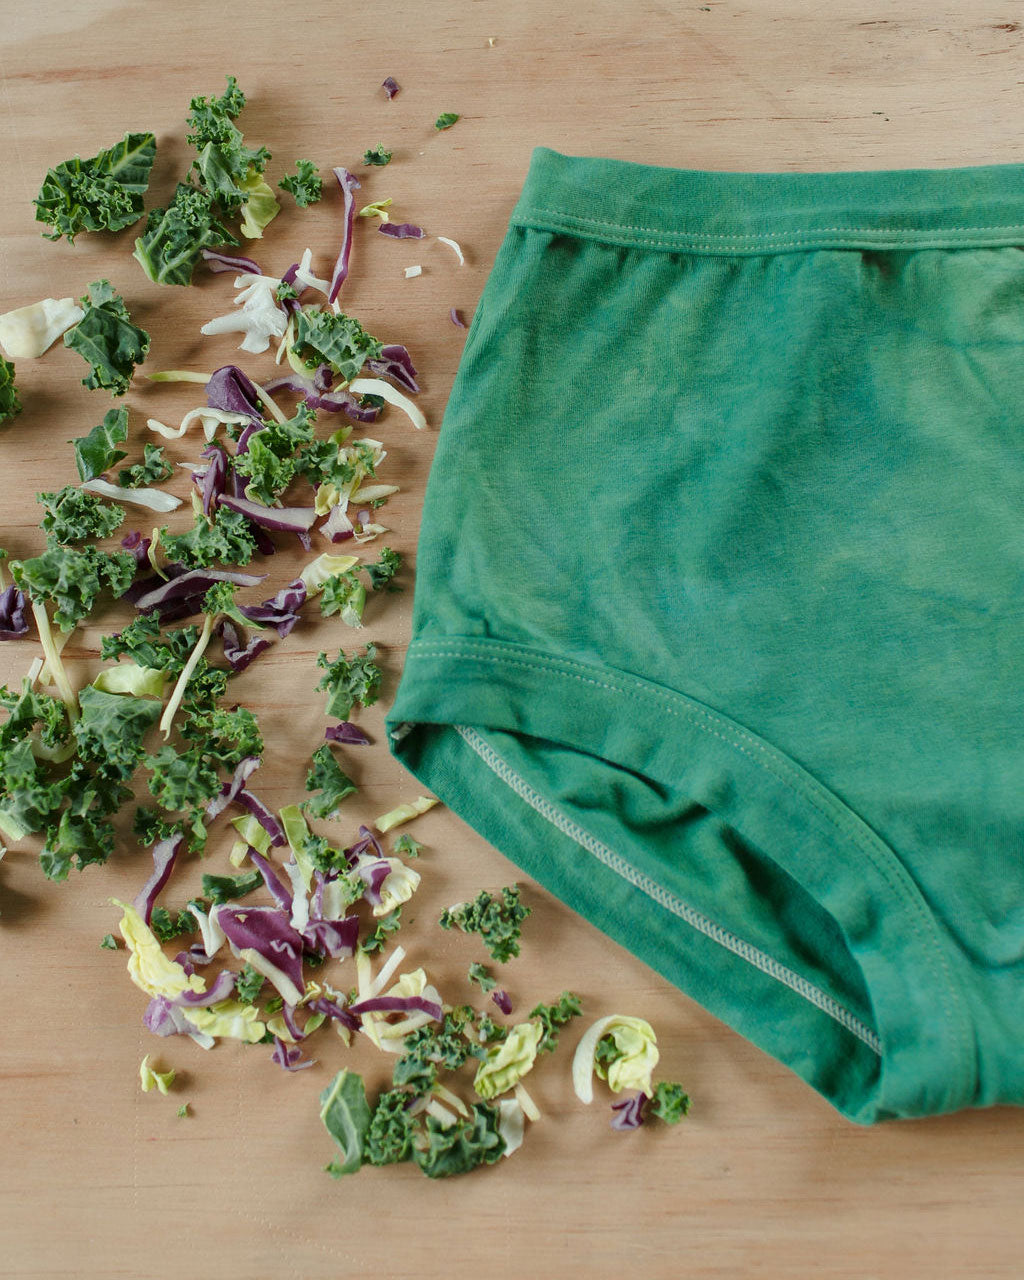 Flat lay of Thunderpants Organic Cotton Original style underwear in hand dyed Emerald with kale around it.